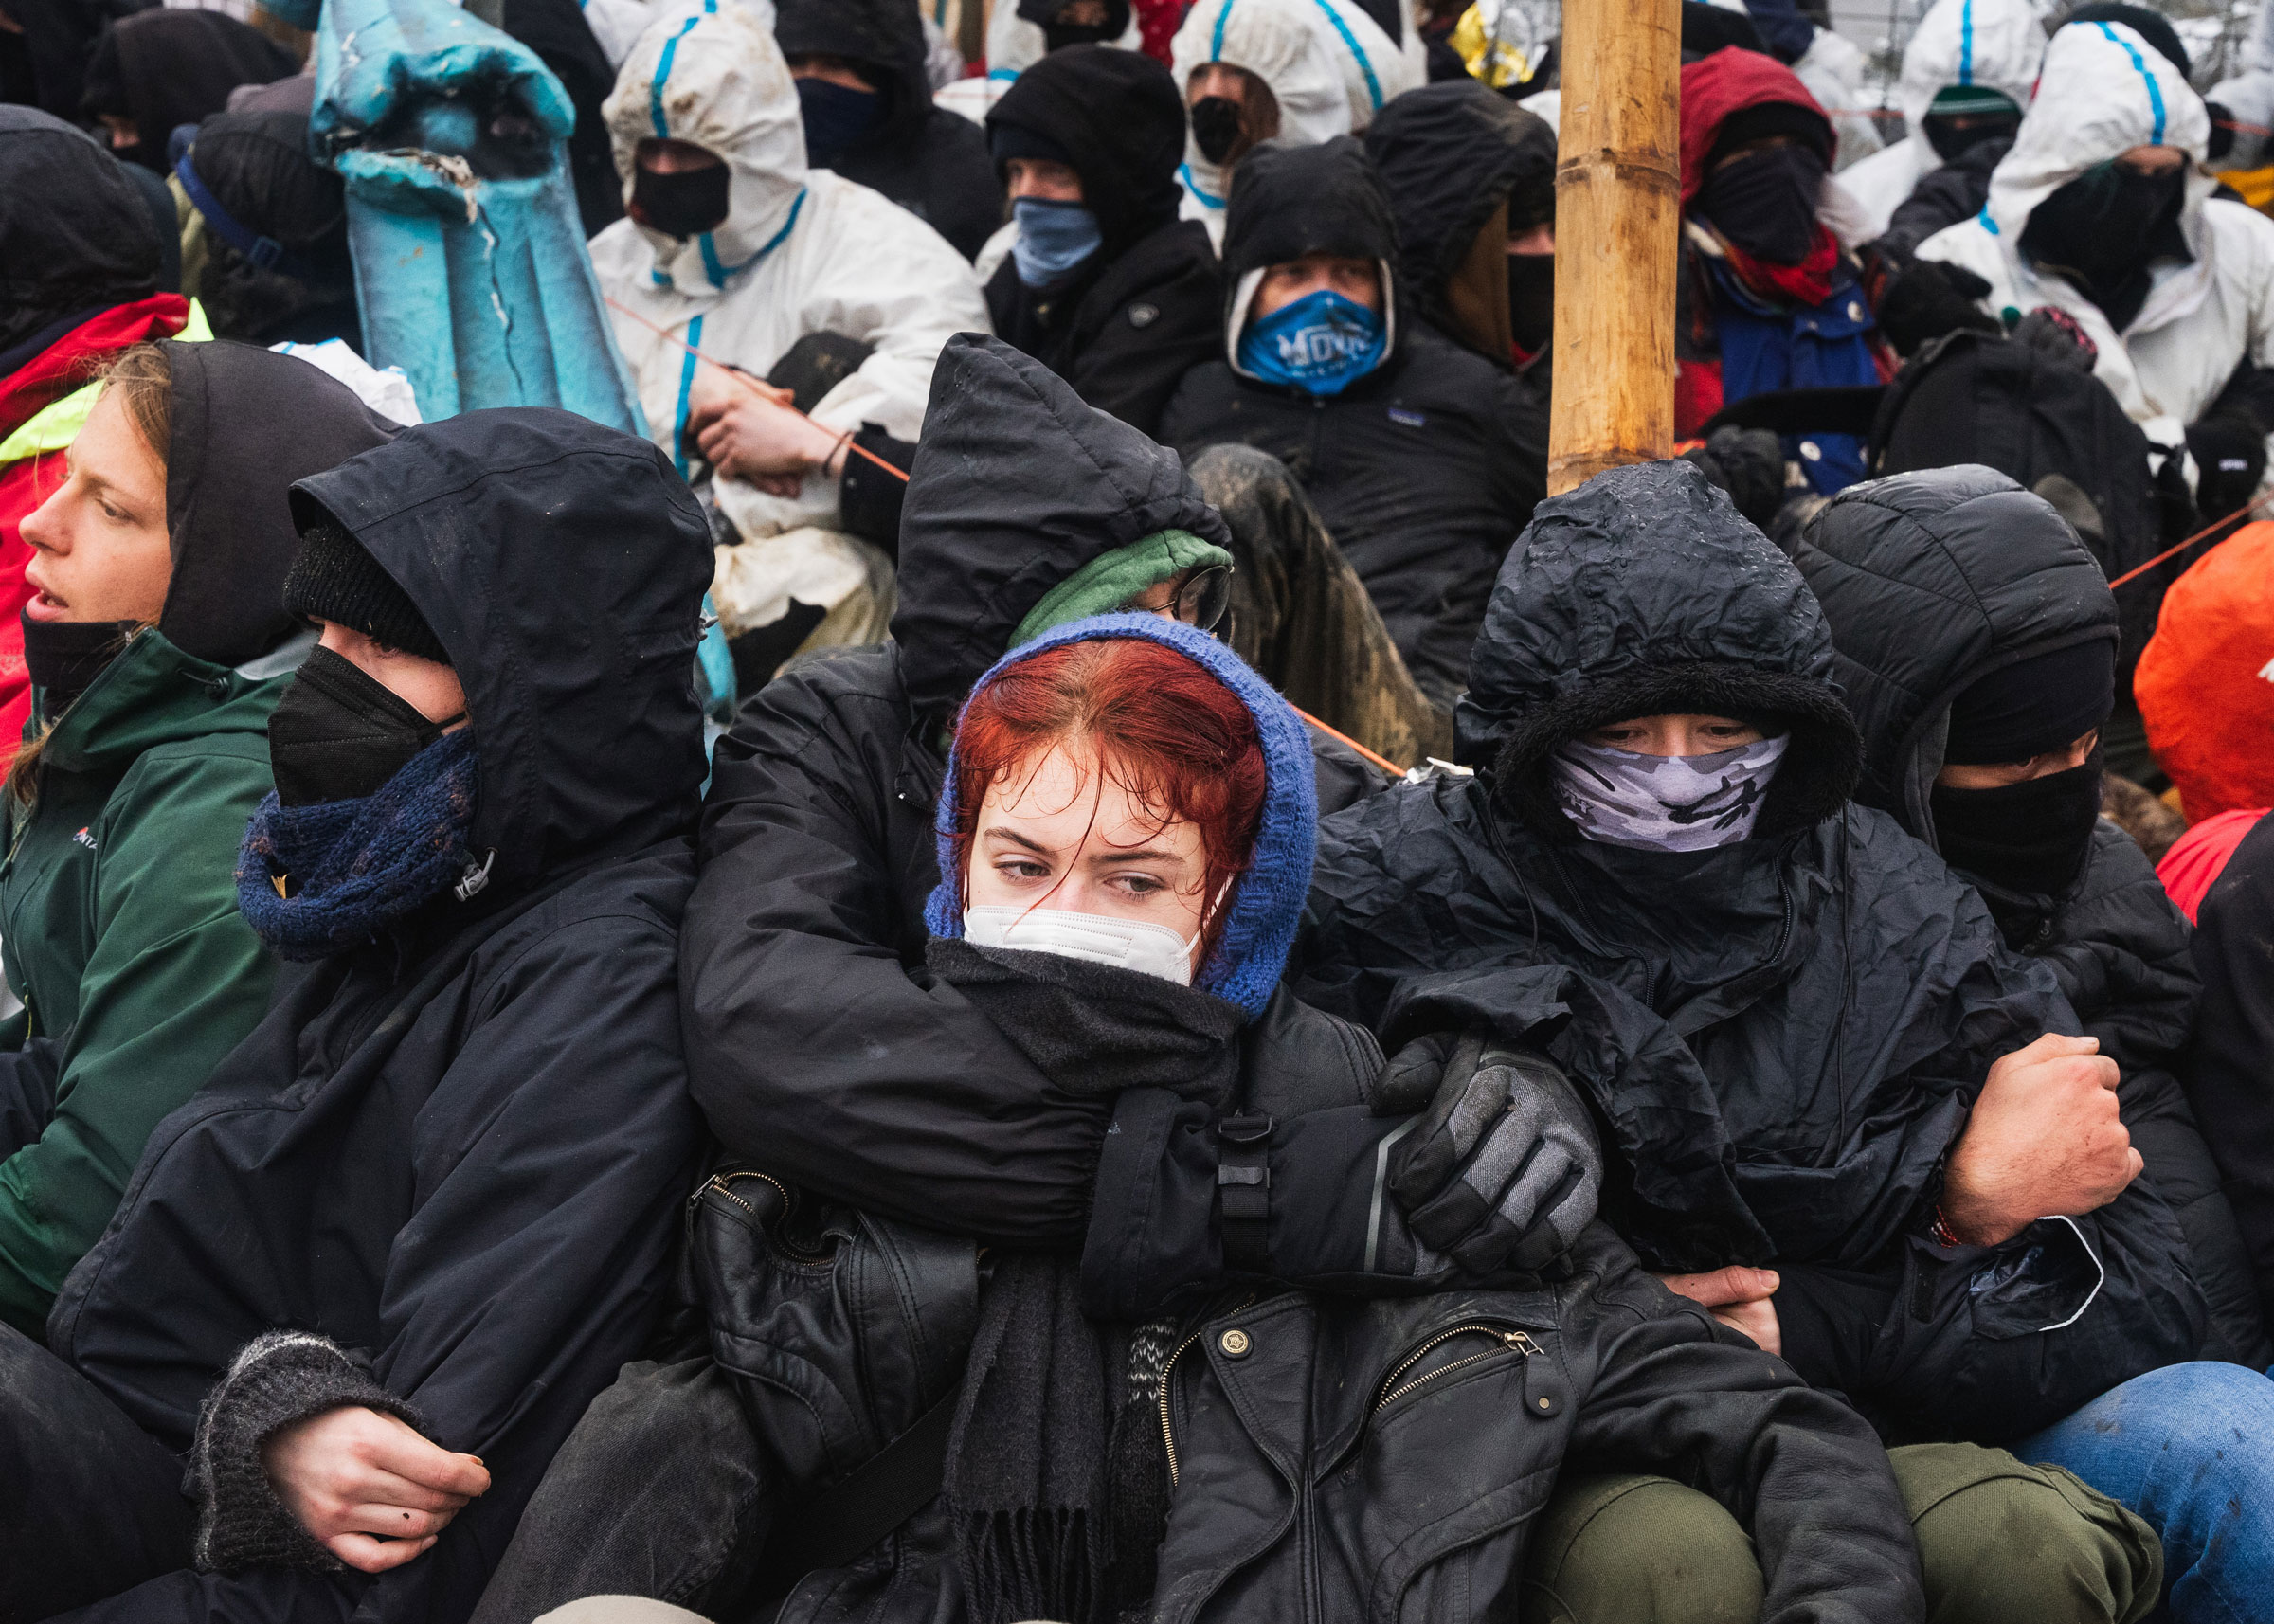 Climate activists face police forces at the Garzweiler mine in Lutzerath, Germany, on Jan. 11, 2023.